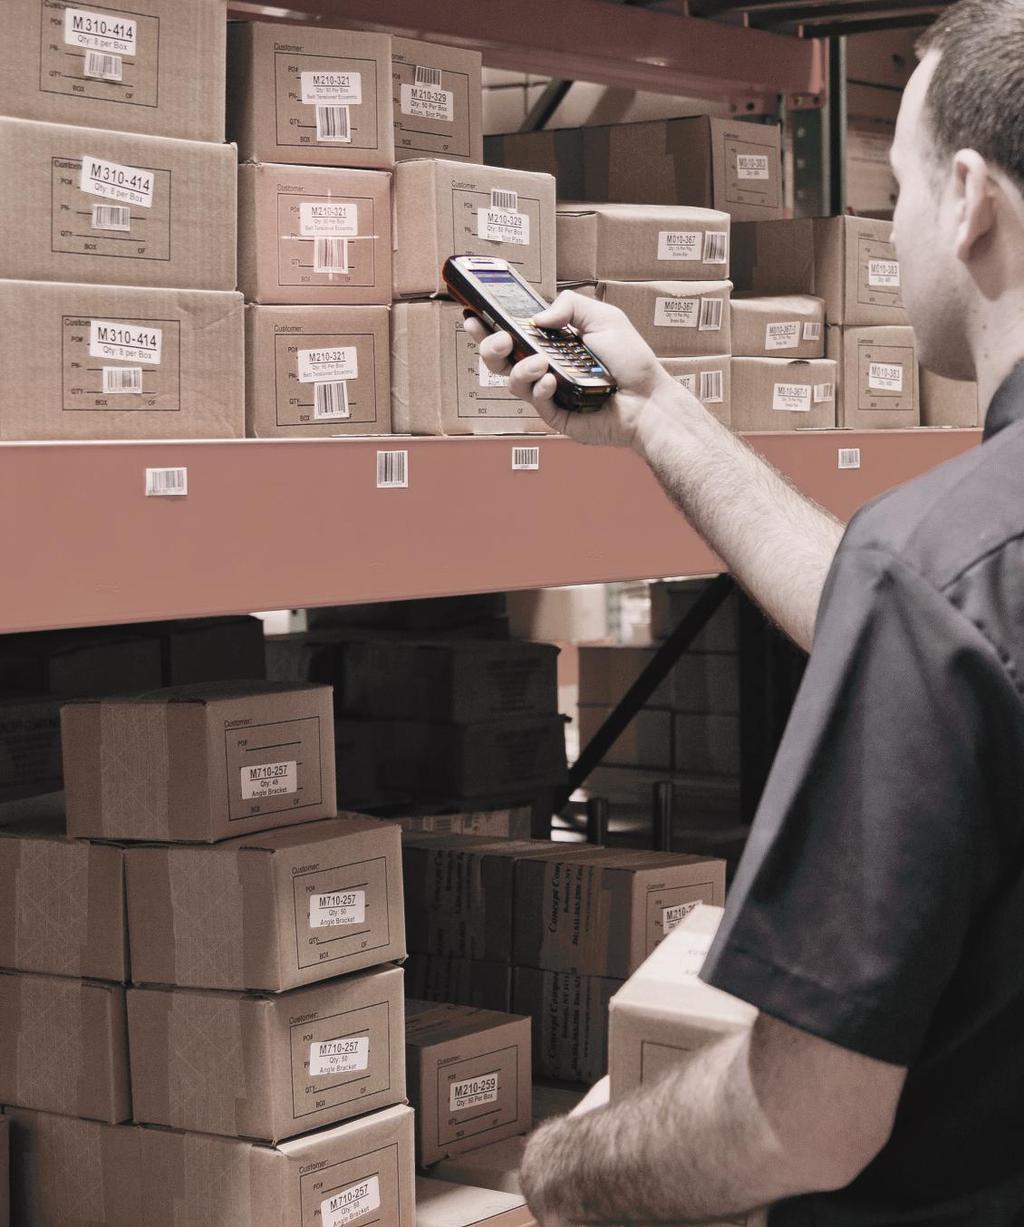 AUTOMATE YOUR INVENTORY MANAGEMENT WITH THE MC2100 AND YOUR ASSOCIATES WILL PROCESS INCOMING SHIPMENTS, REPLENISH SHELVES